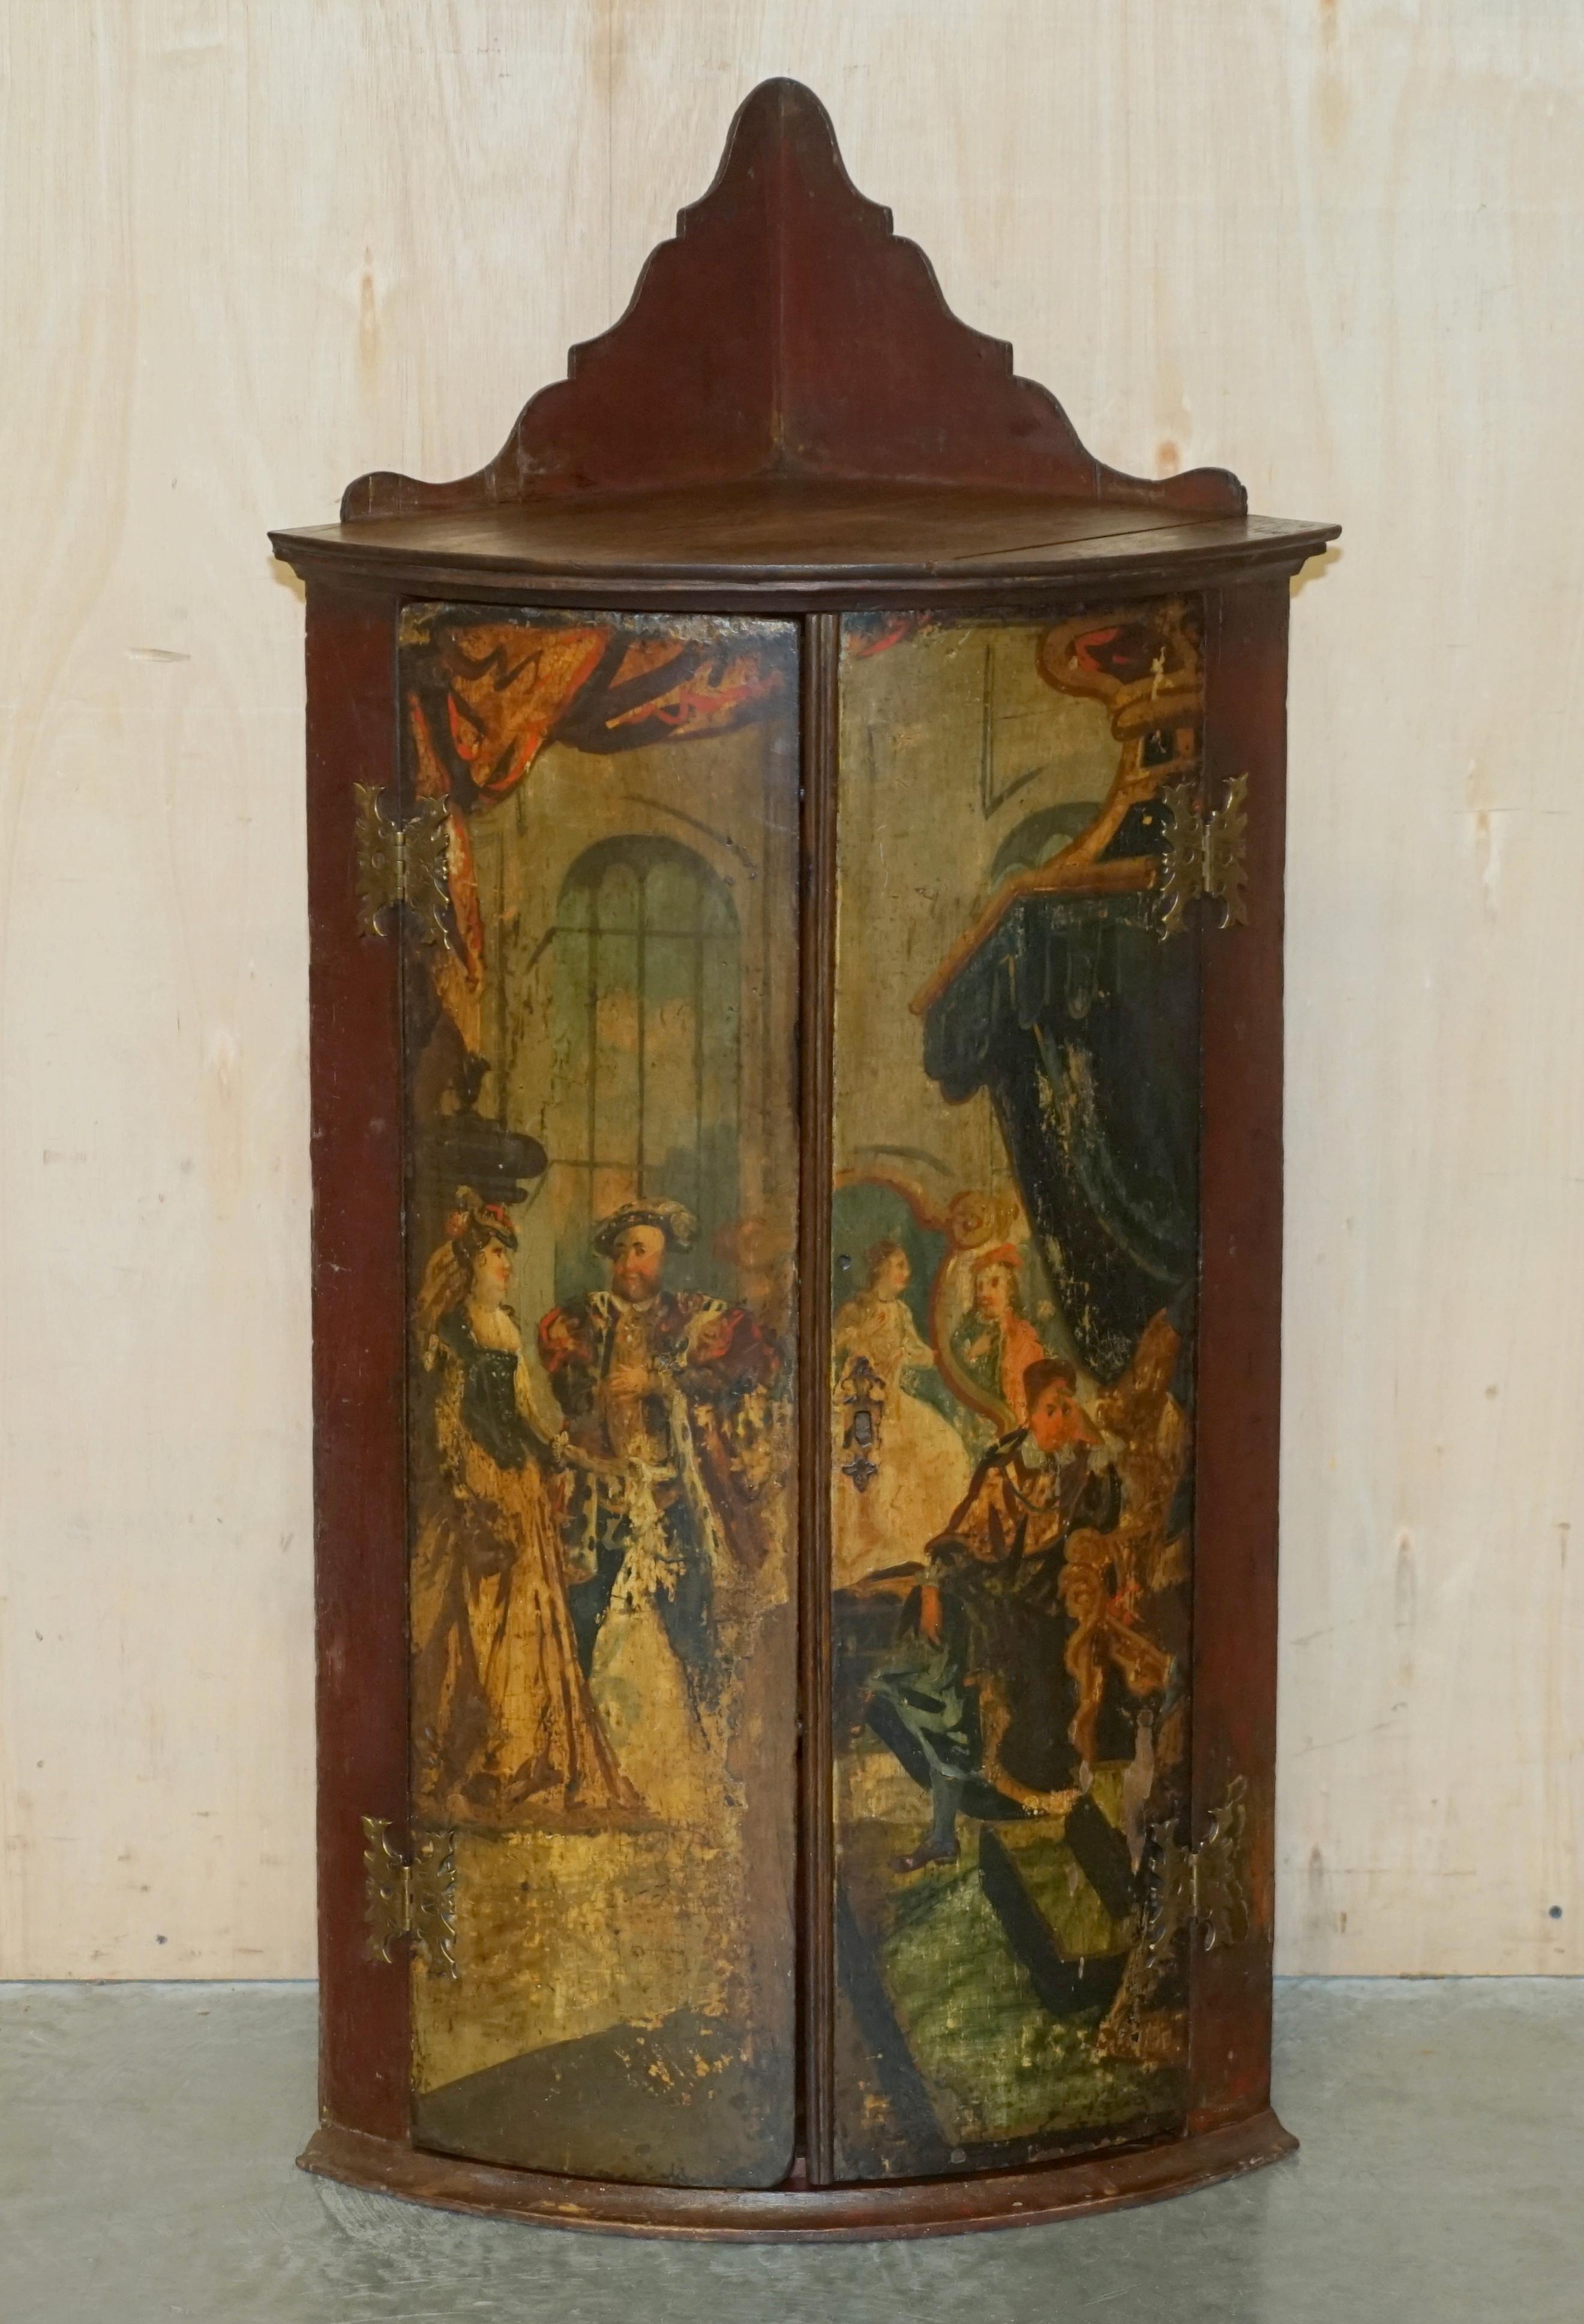 Royal House Antiques

Royal House Antiques is delighted to offer for sale this absolutely exquisite and important antique pair of George I circa 1700 Polychrome painted hanging corner wall cabinets one of which depicts King Henry VIII 

Please note